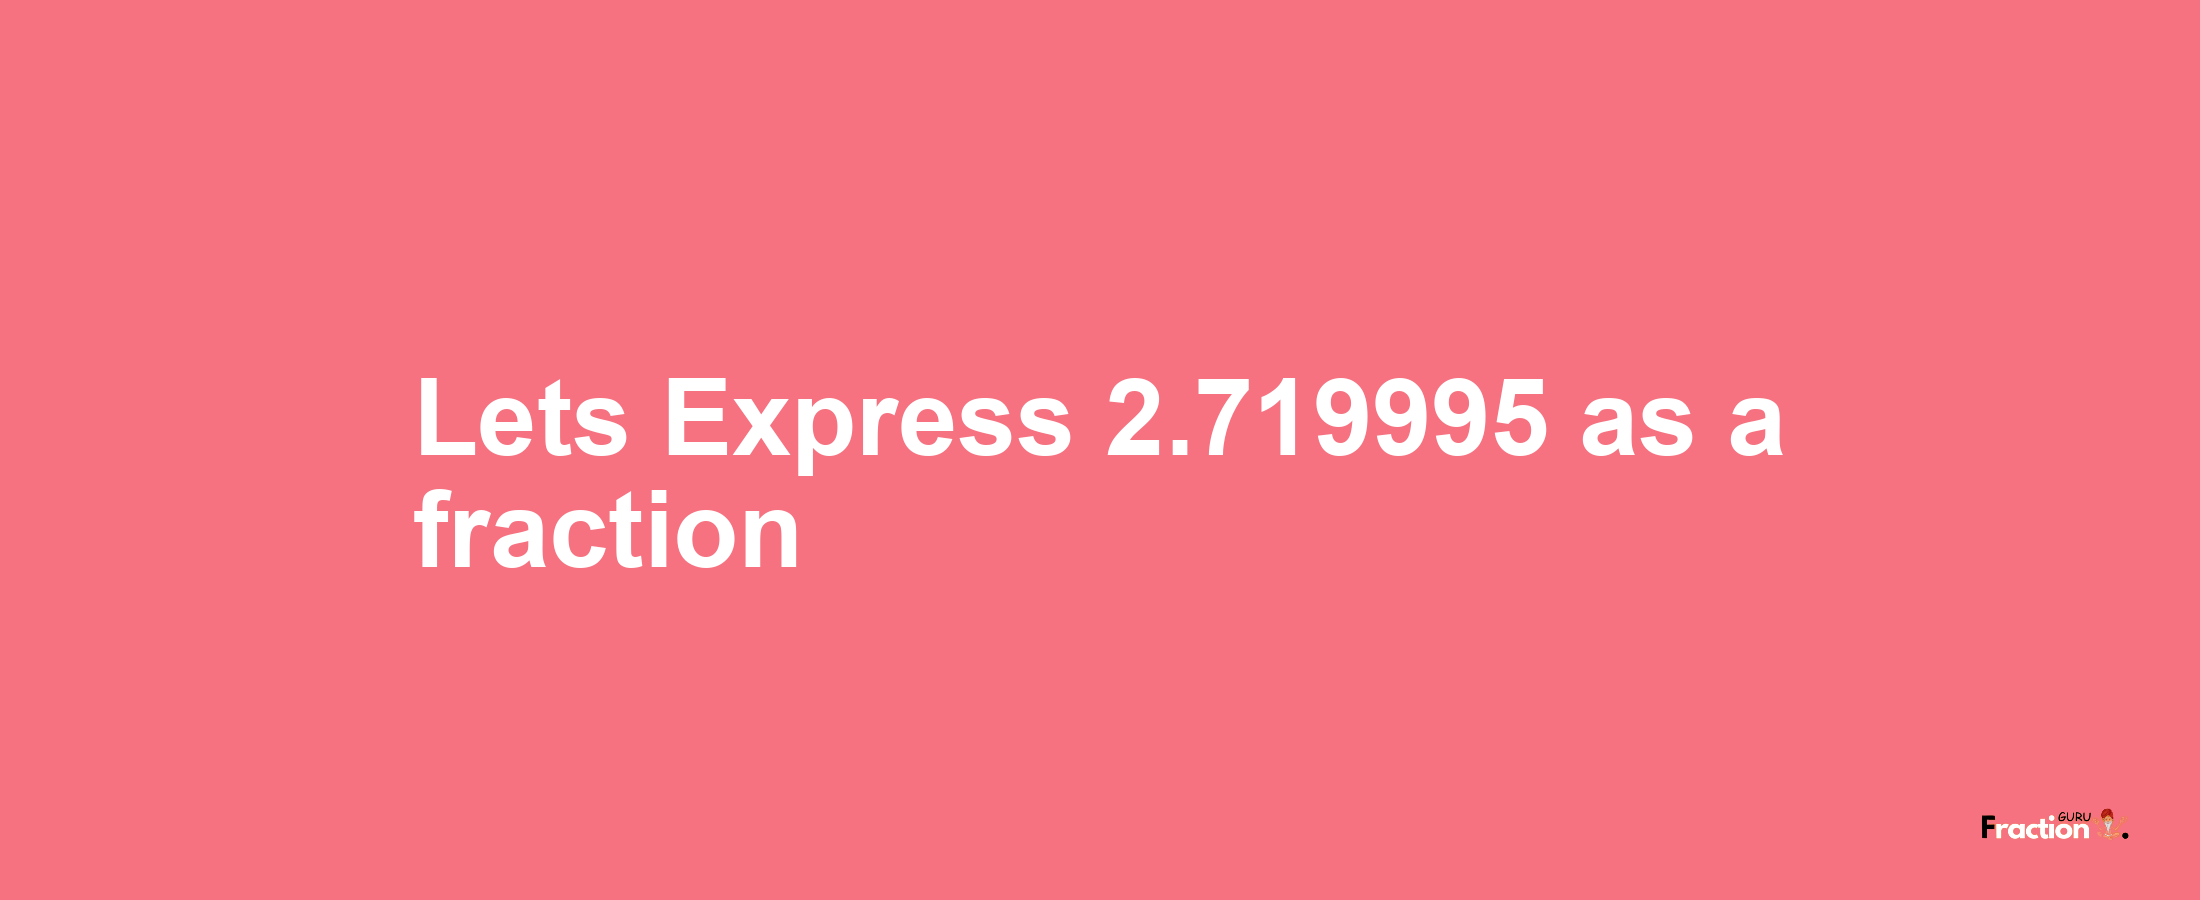 Lets Express 2.719995 as afraction